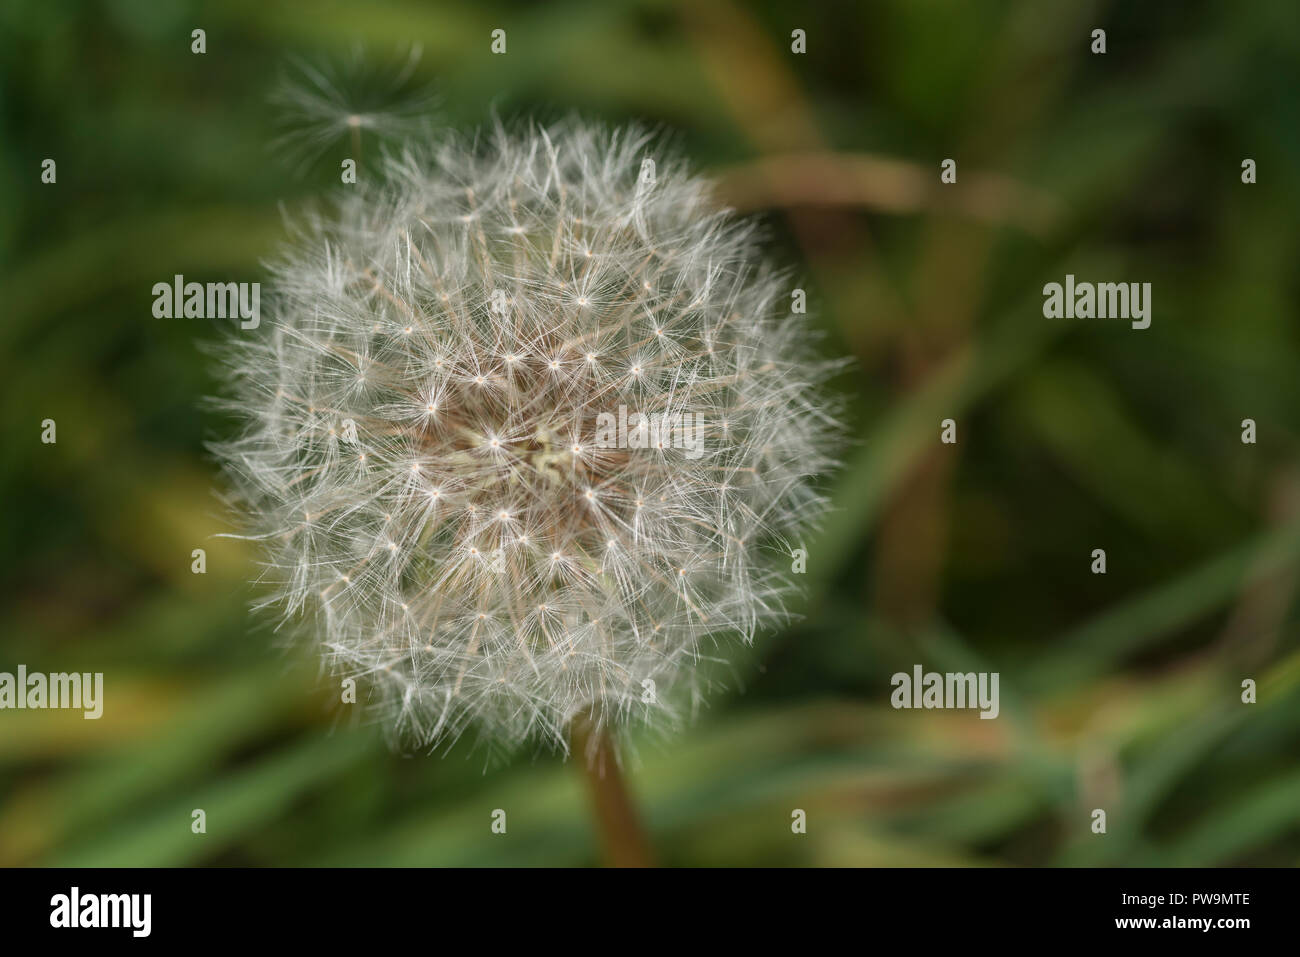 Close up of a dandelion flower with seeds Stock Photo